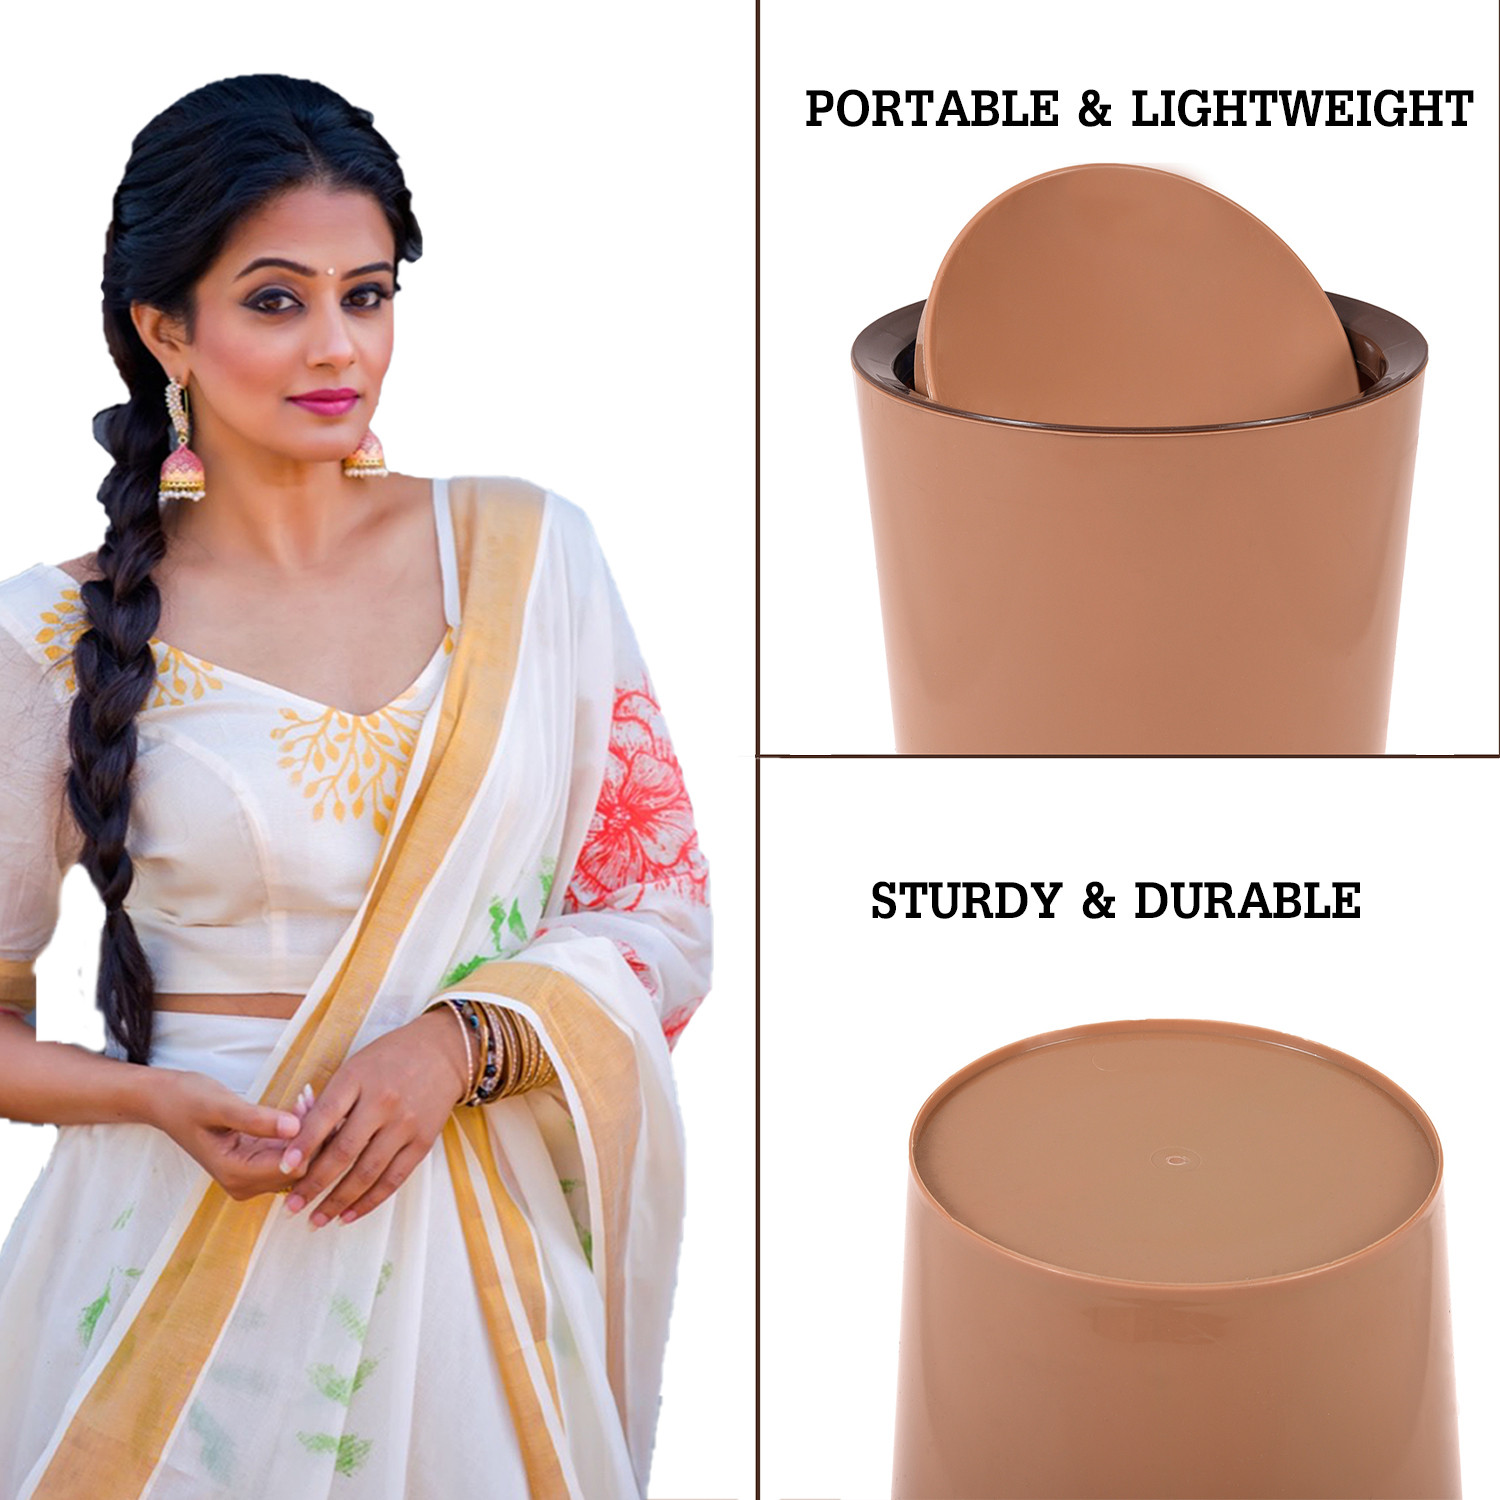 Kuber Industries Swinging Lid Dustbin|Plastic Garbage Waste Bin|Trash Can for Living Room|Kitchen|Office|6 Litre|Pack of 2 (Peach & Coffee)